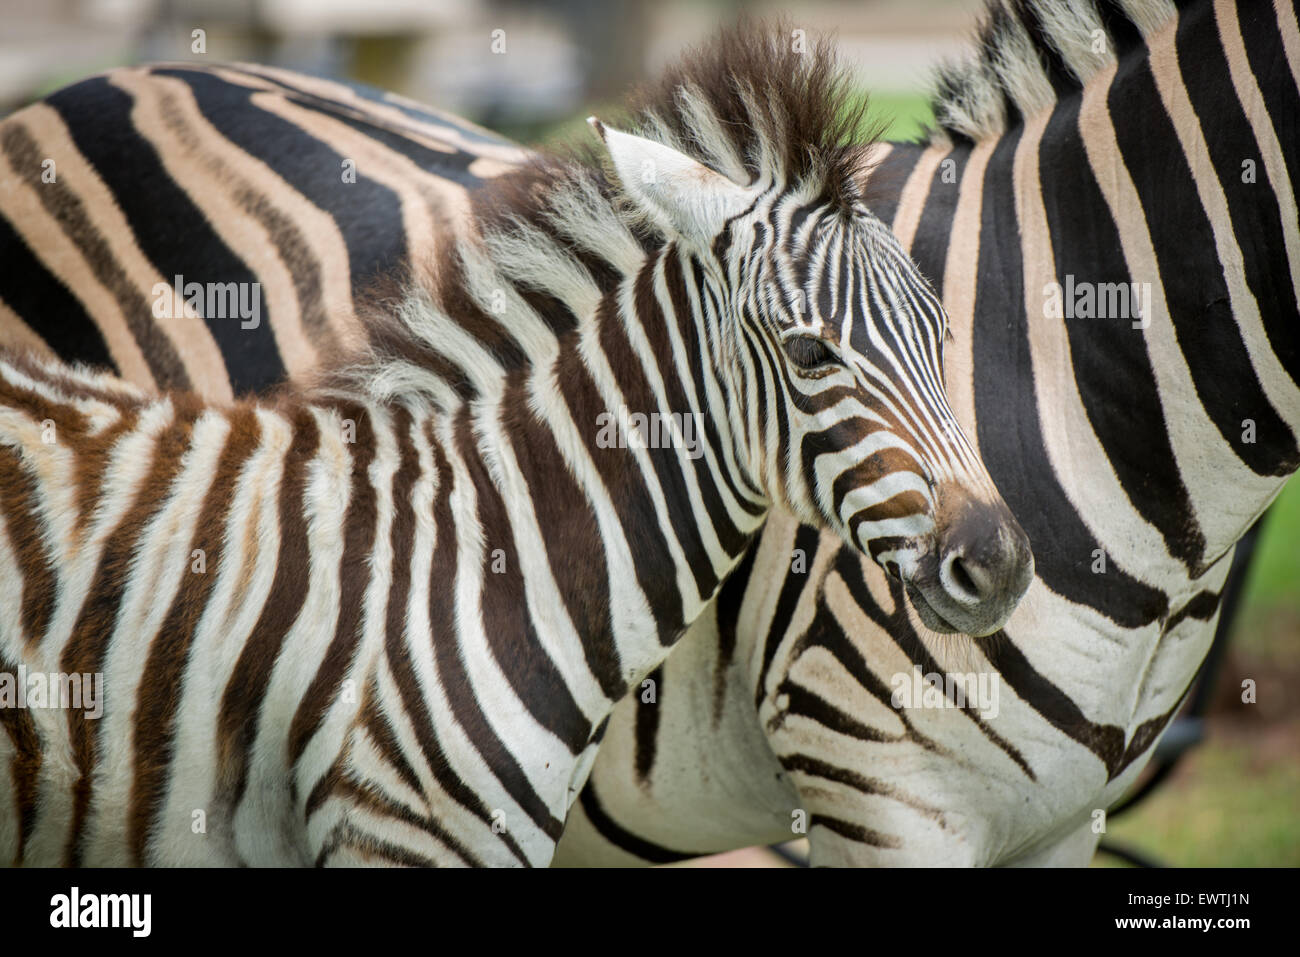 SOUTH AFRICA- Zebra (Equus quagga) roaming in the Dinokeng Game Reserve Stock Photo